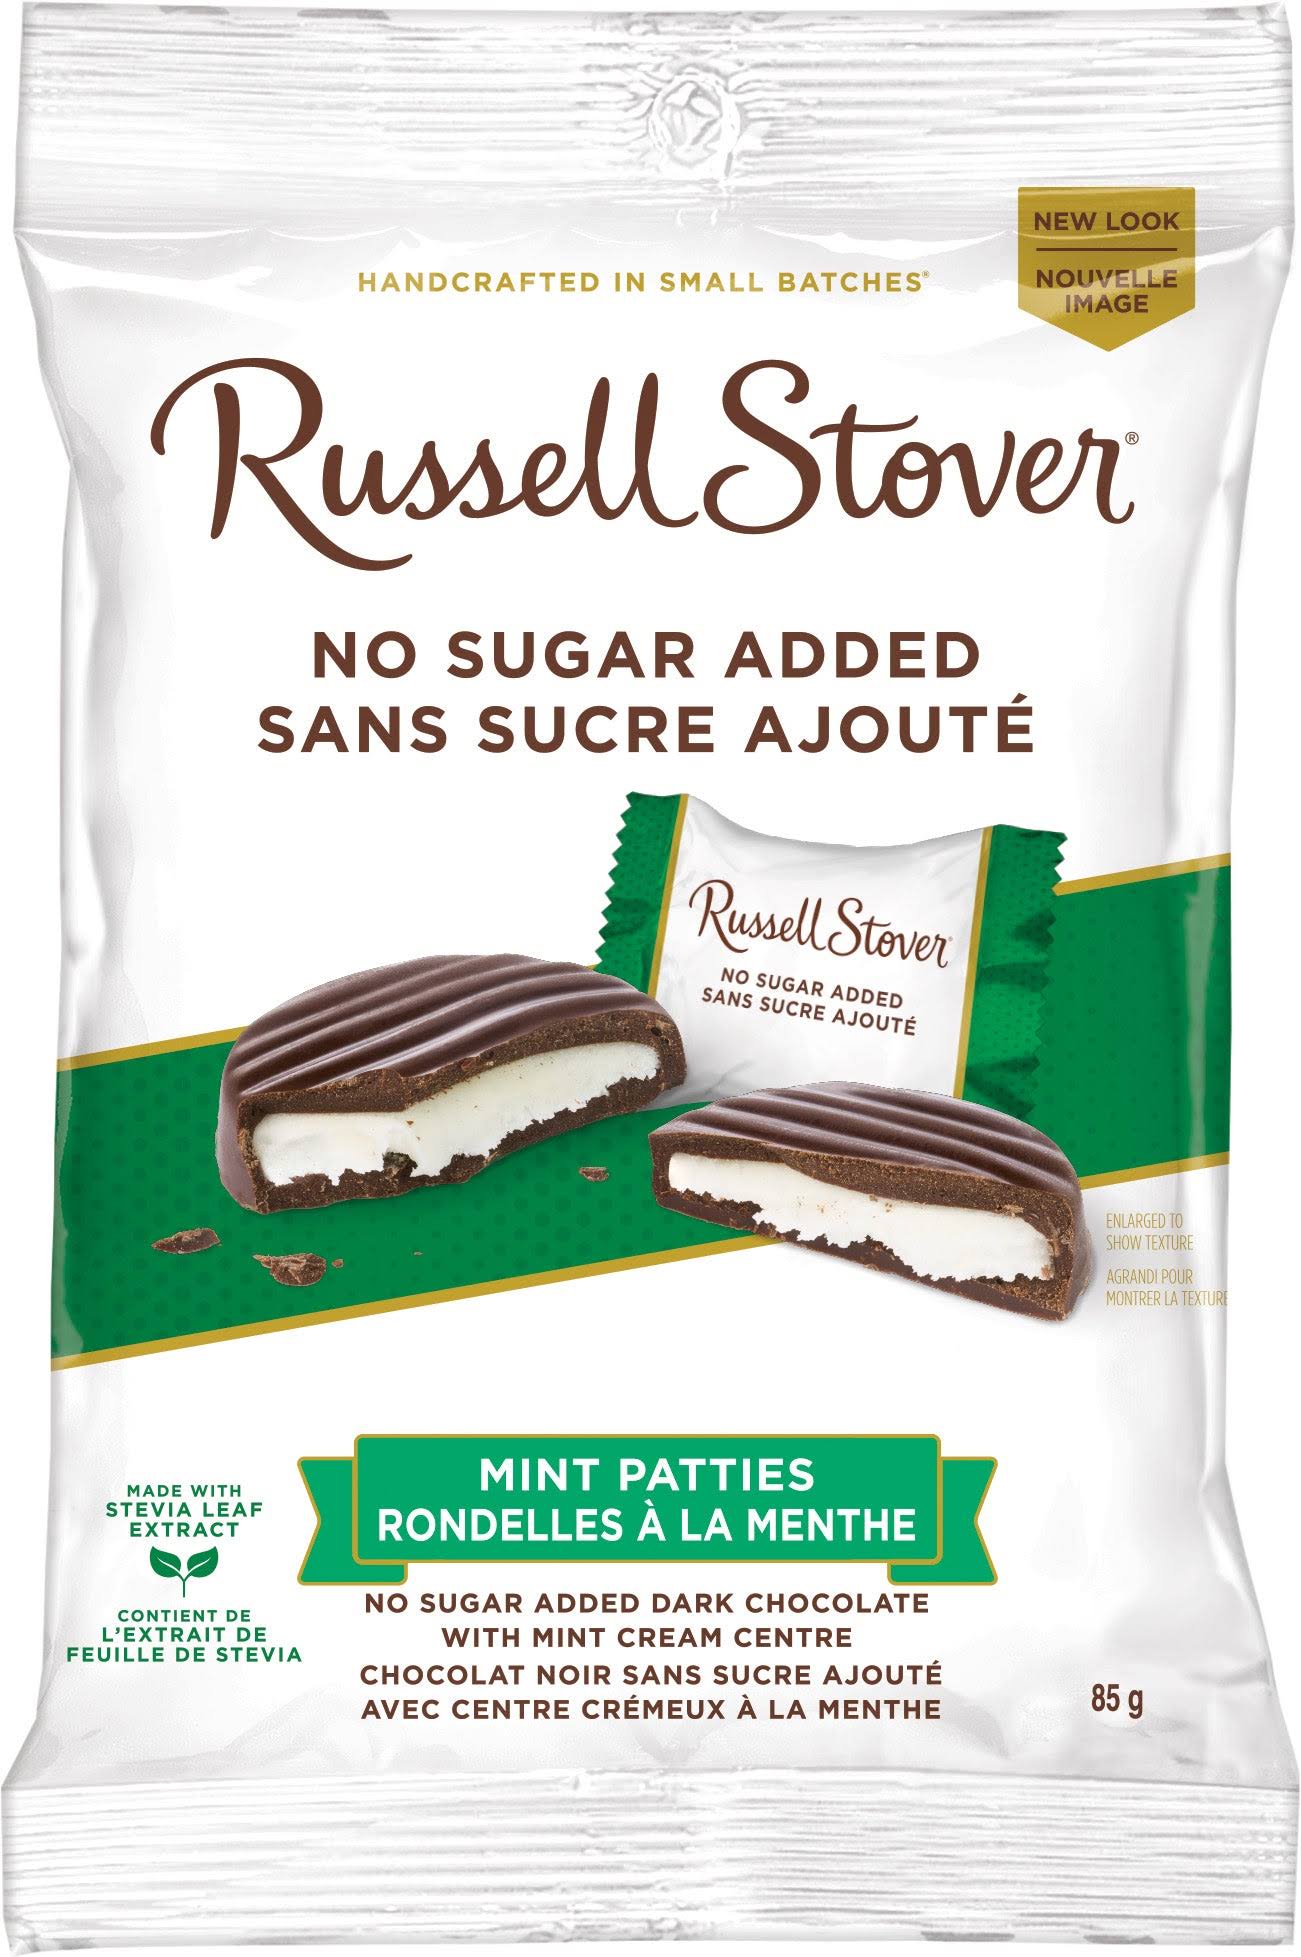 Russell Stover Sugar Free Mint Patties Candy - Covered in Dark Chocolate, 3oz